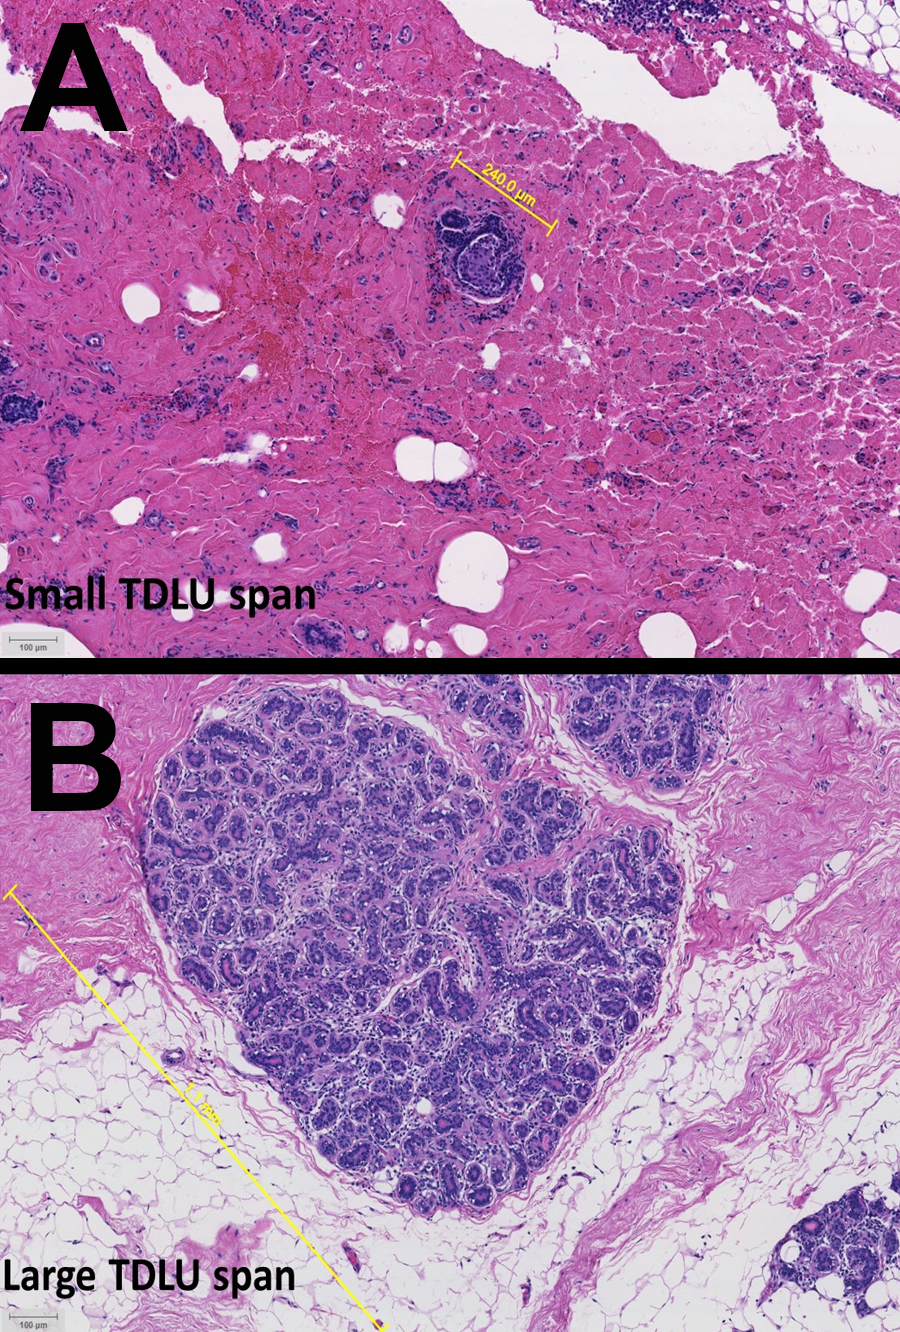 H&E images from patients with (A) luminal A and (B) triple negative breast cancer.  In the images above, the normal tissue adjacent to a triple negative tumor (B) shows a larger TDLU, and therefore reduced involution, compared to the smaller TDLU in normal tissue adjacent to a luminal A tumor (A).